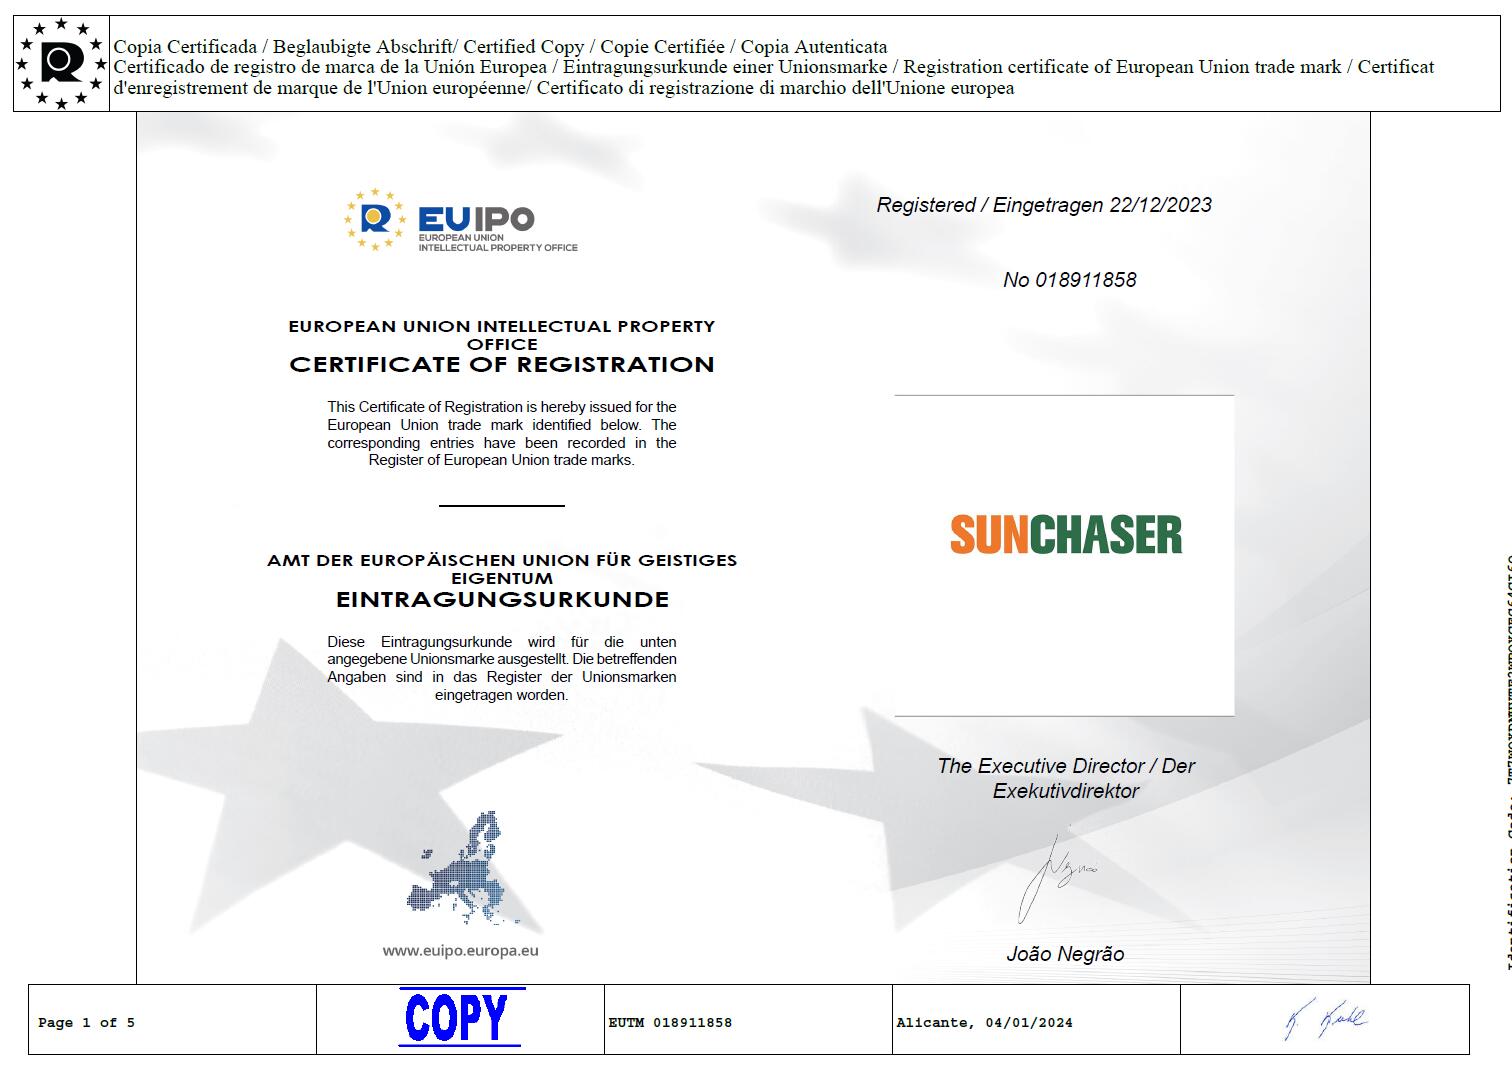 TIANTECH SOLAR GROUP Successfully Registered the SUNCHASER Trademark  in Europe.